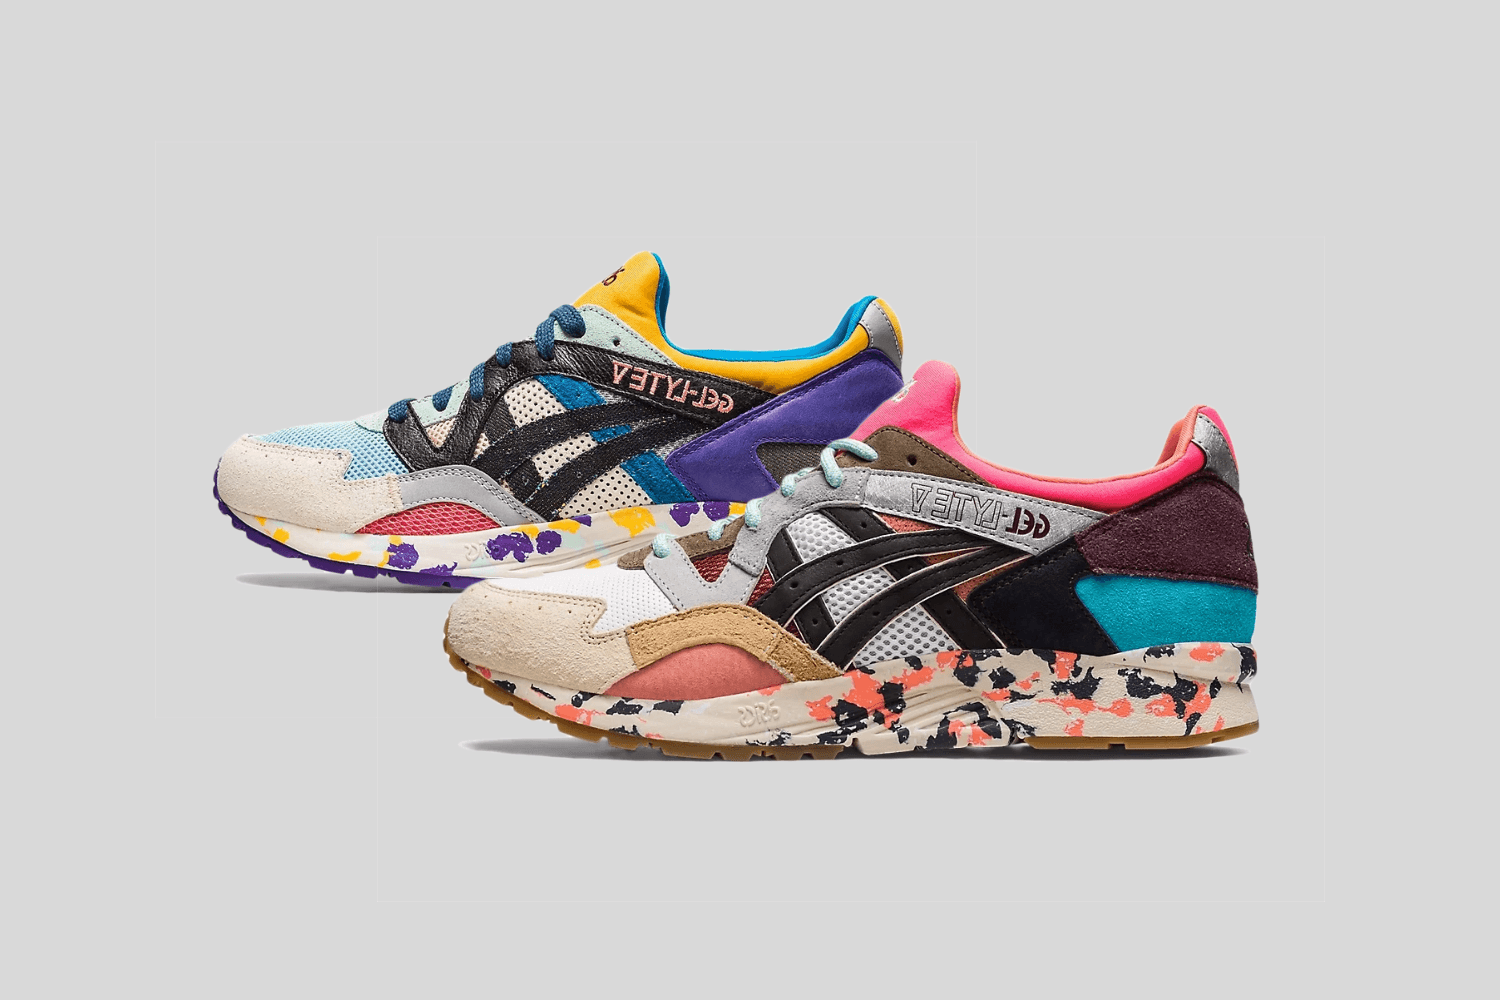 The ASICS Gel-Lyte V comes in a Multi-Colour Pack